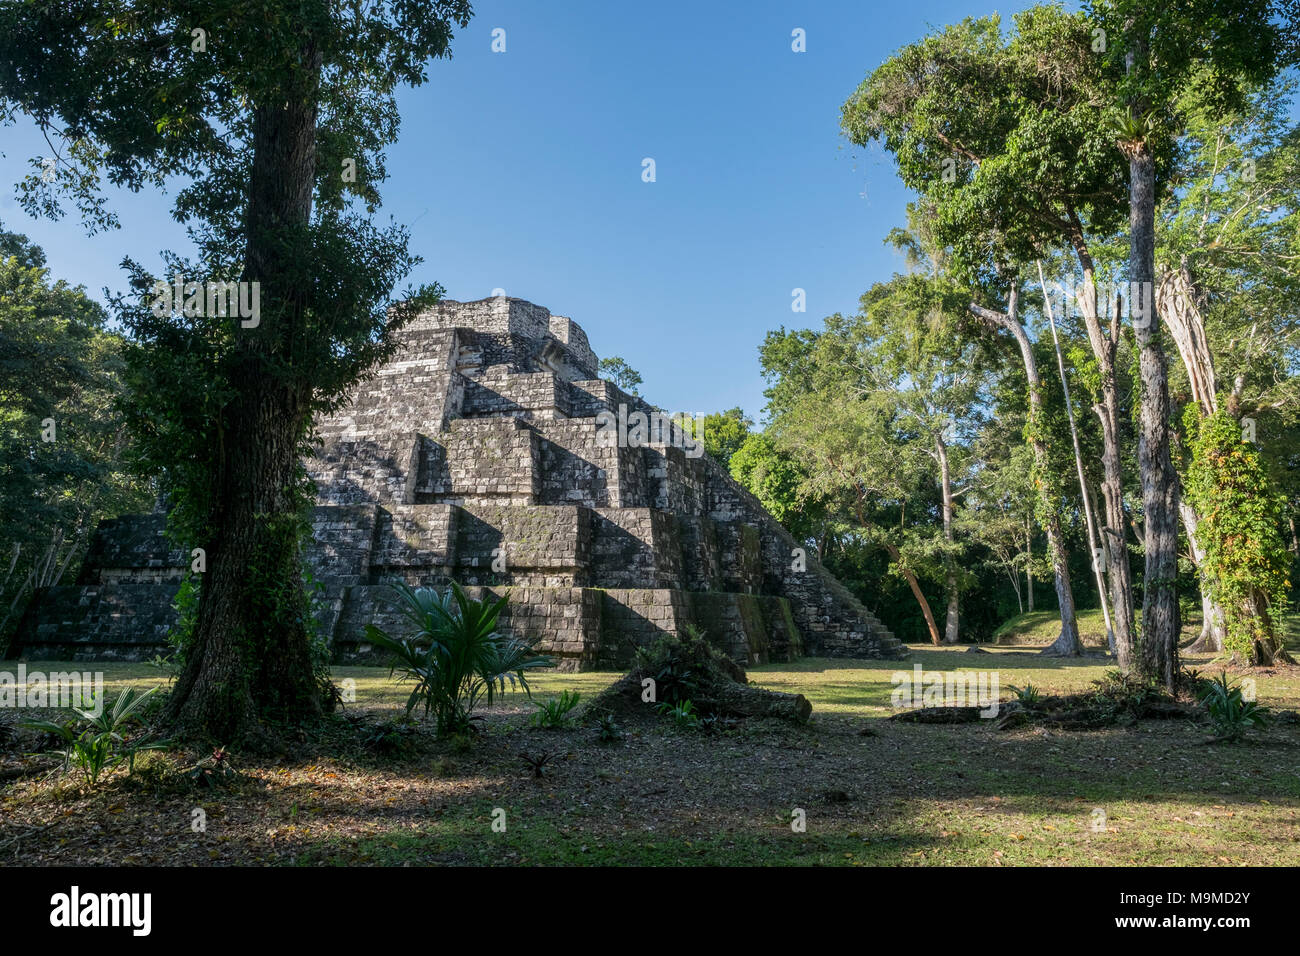 Ancient ruins from the Mayan archeological site in Yaxha, Guatemala Stock Photo